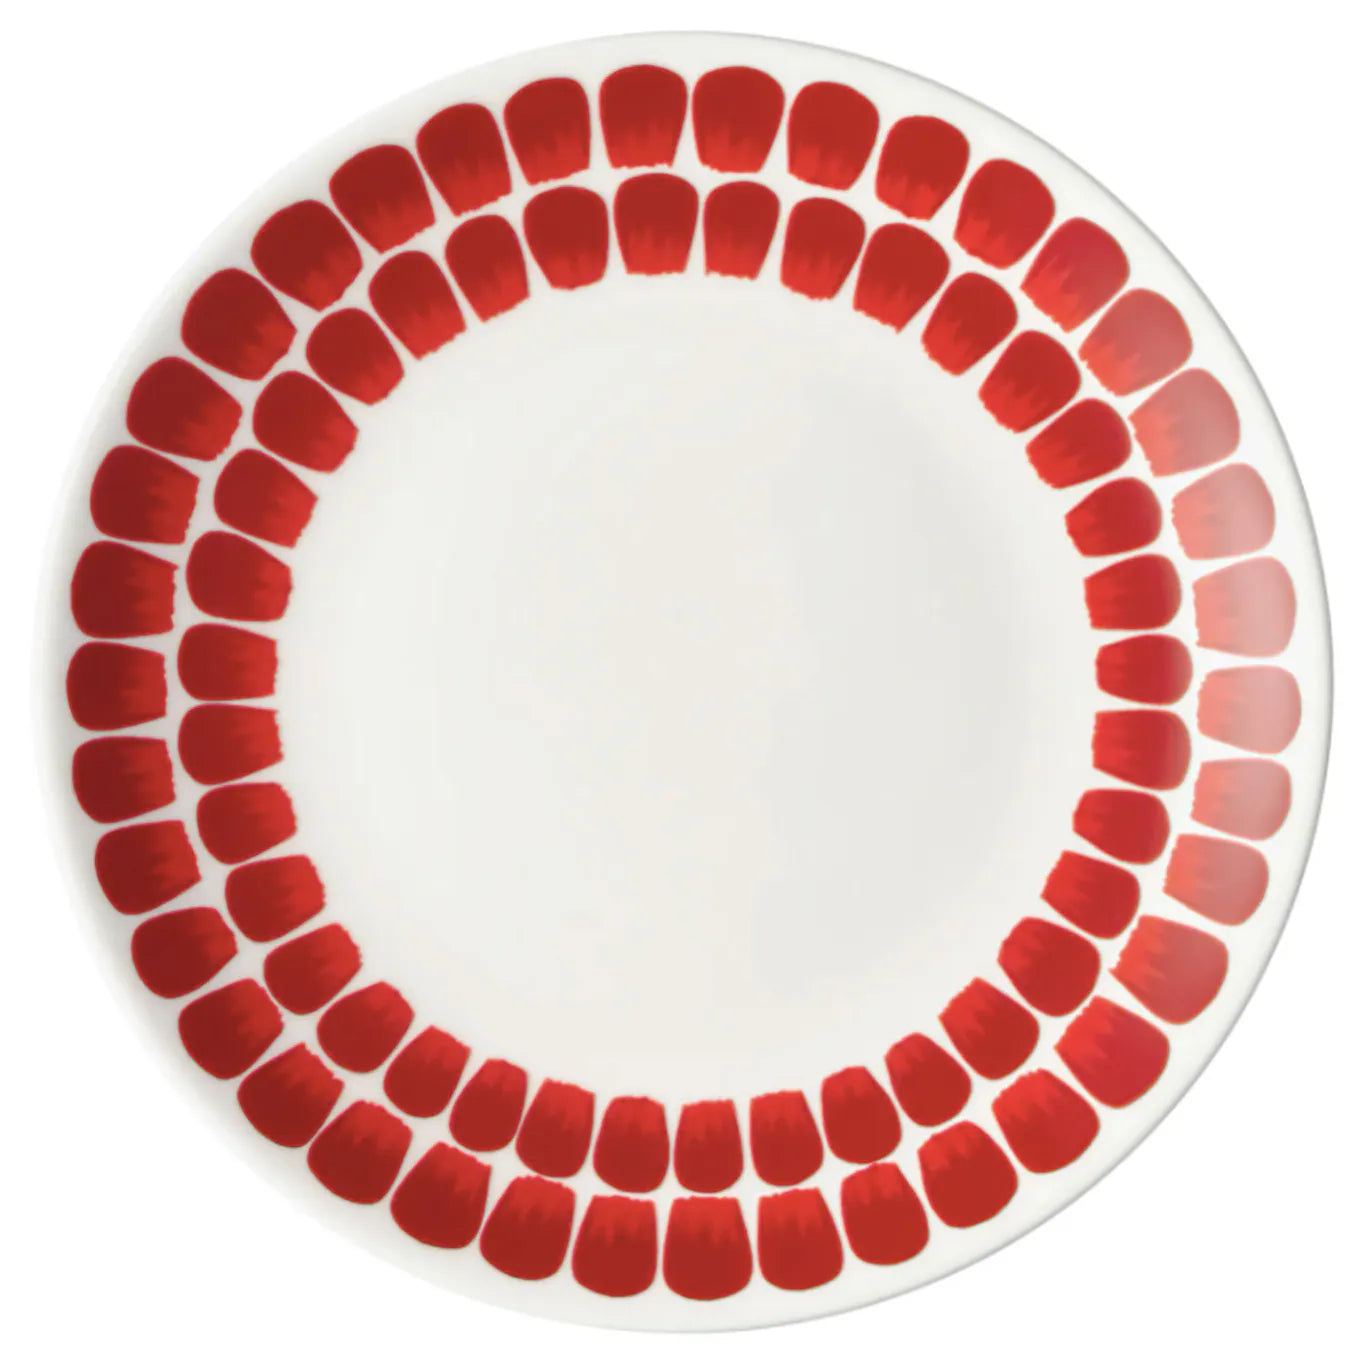 24H by Arabia Finland Plate 20cm / 8" Salad Plate Tuokio Red